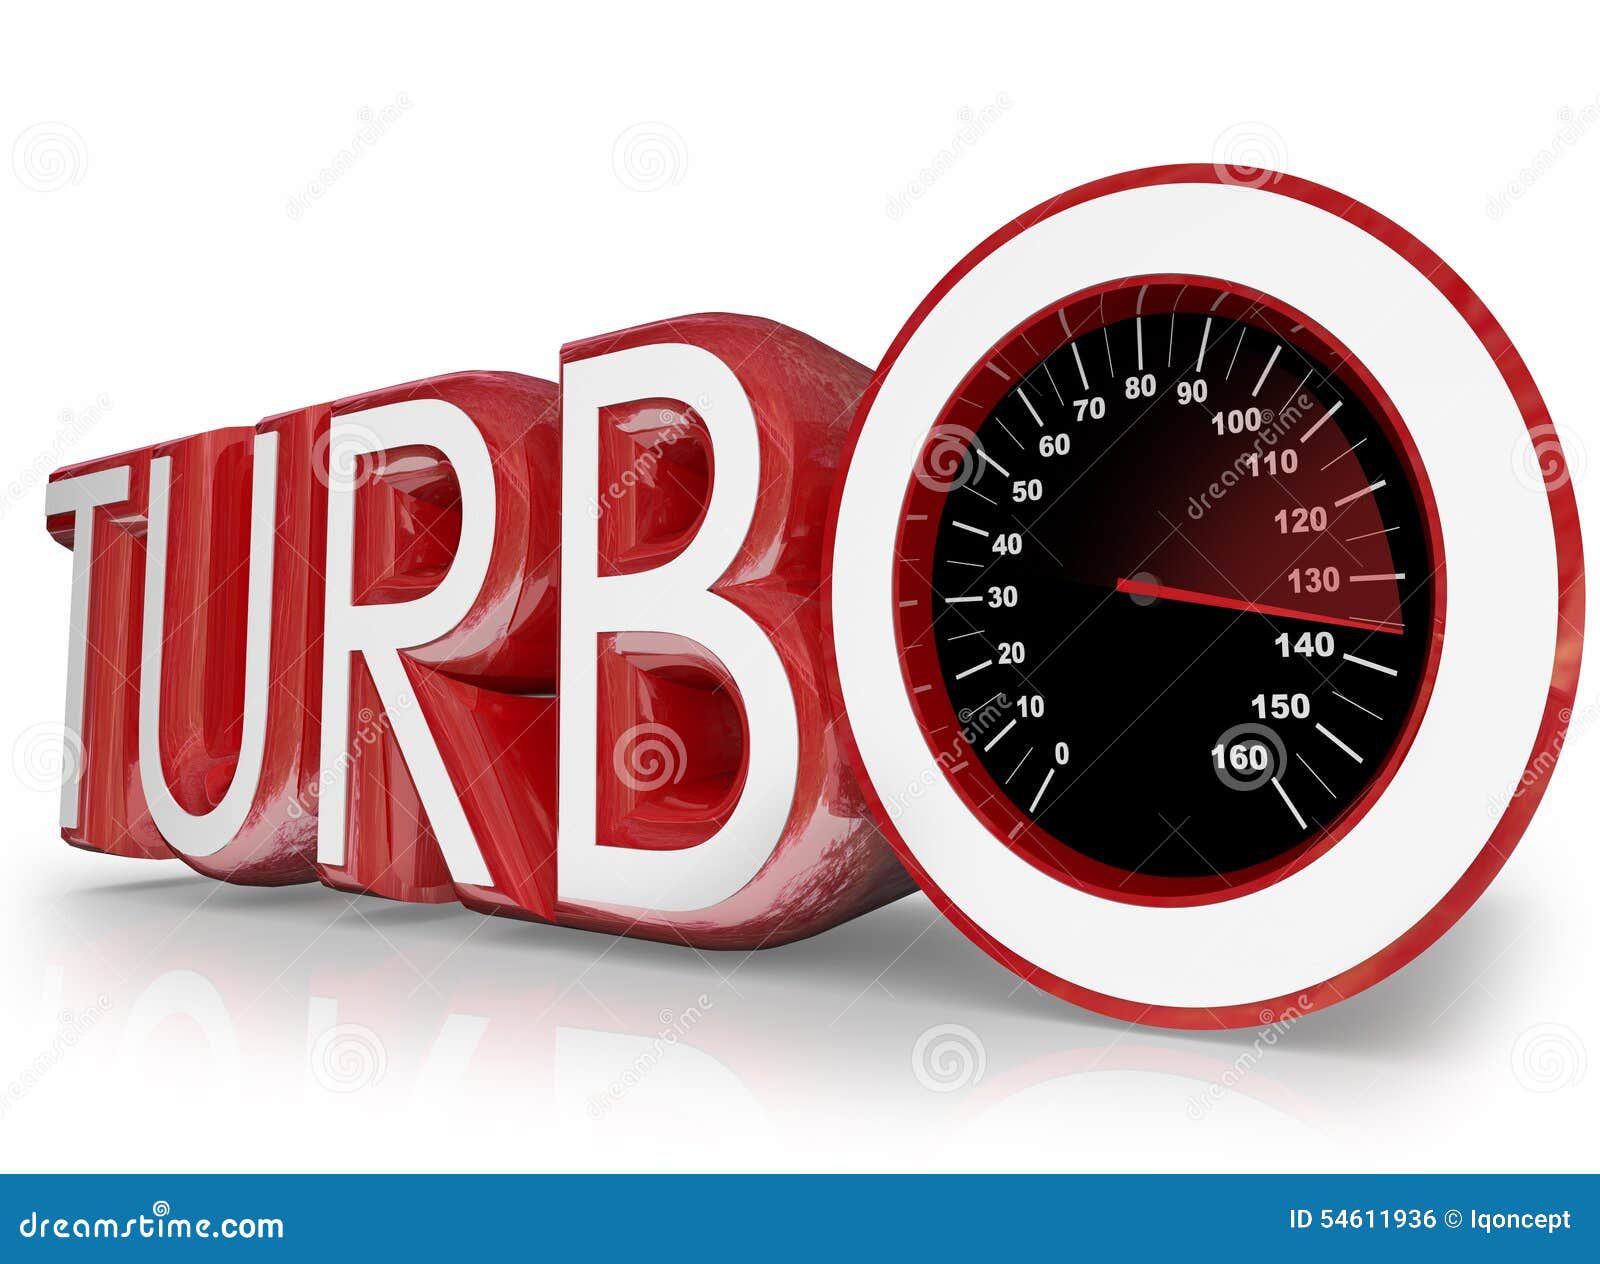 Turbo Red 3d Word Speedometer Fast Racing Stock Illustration - Image